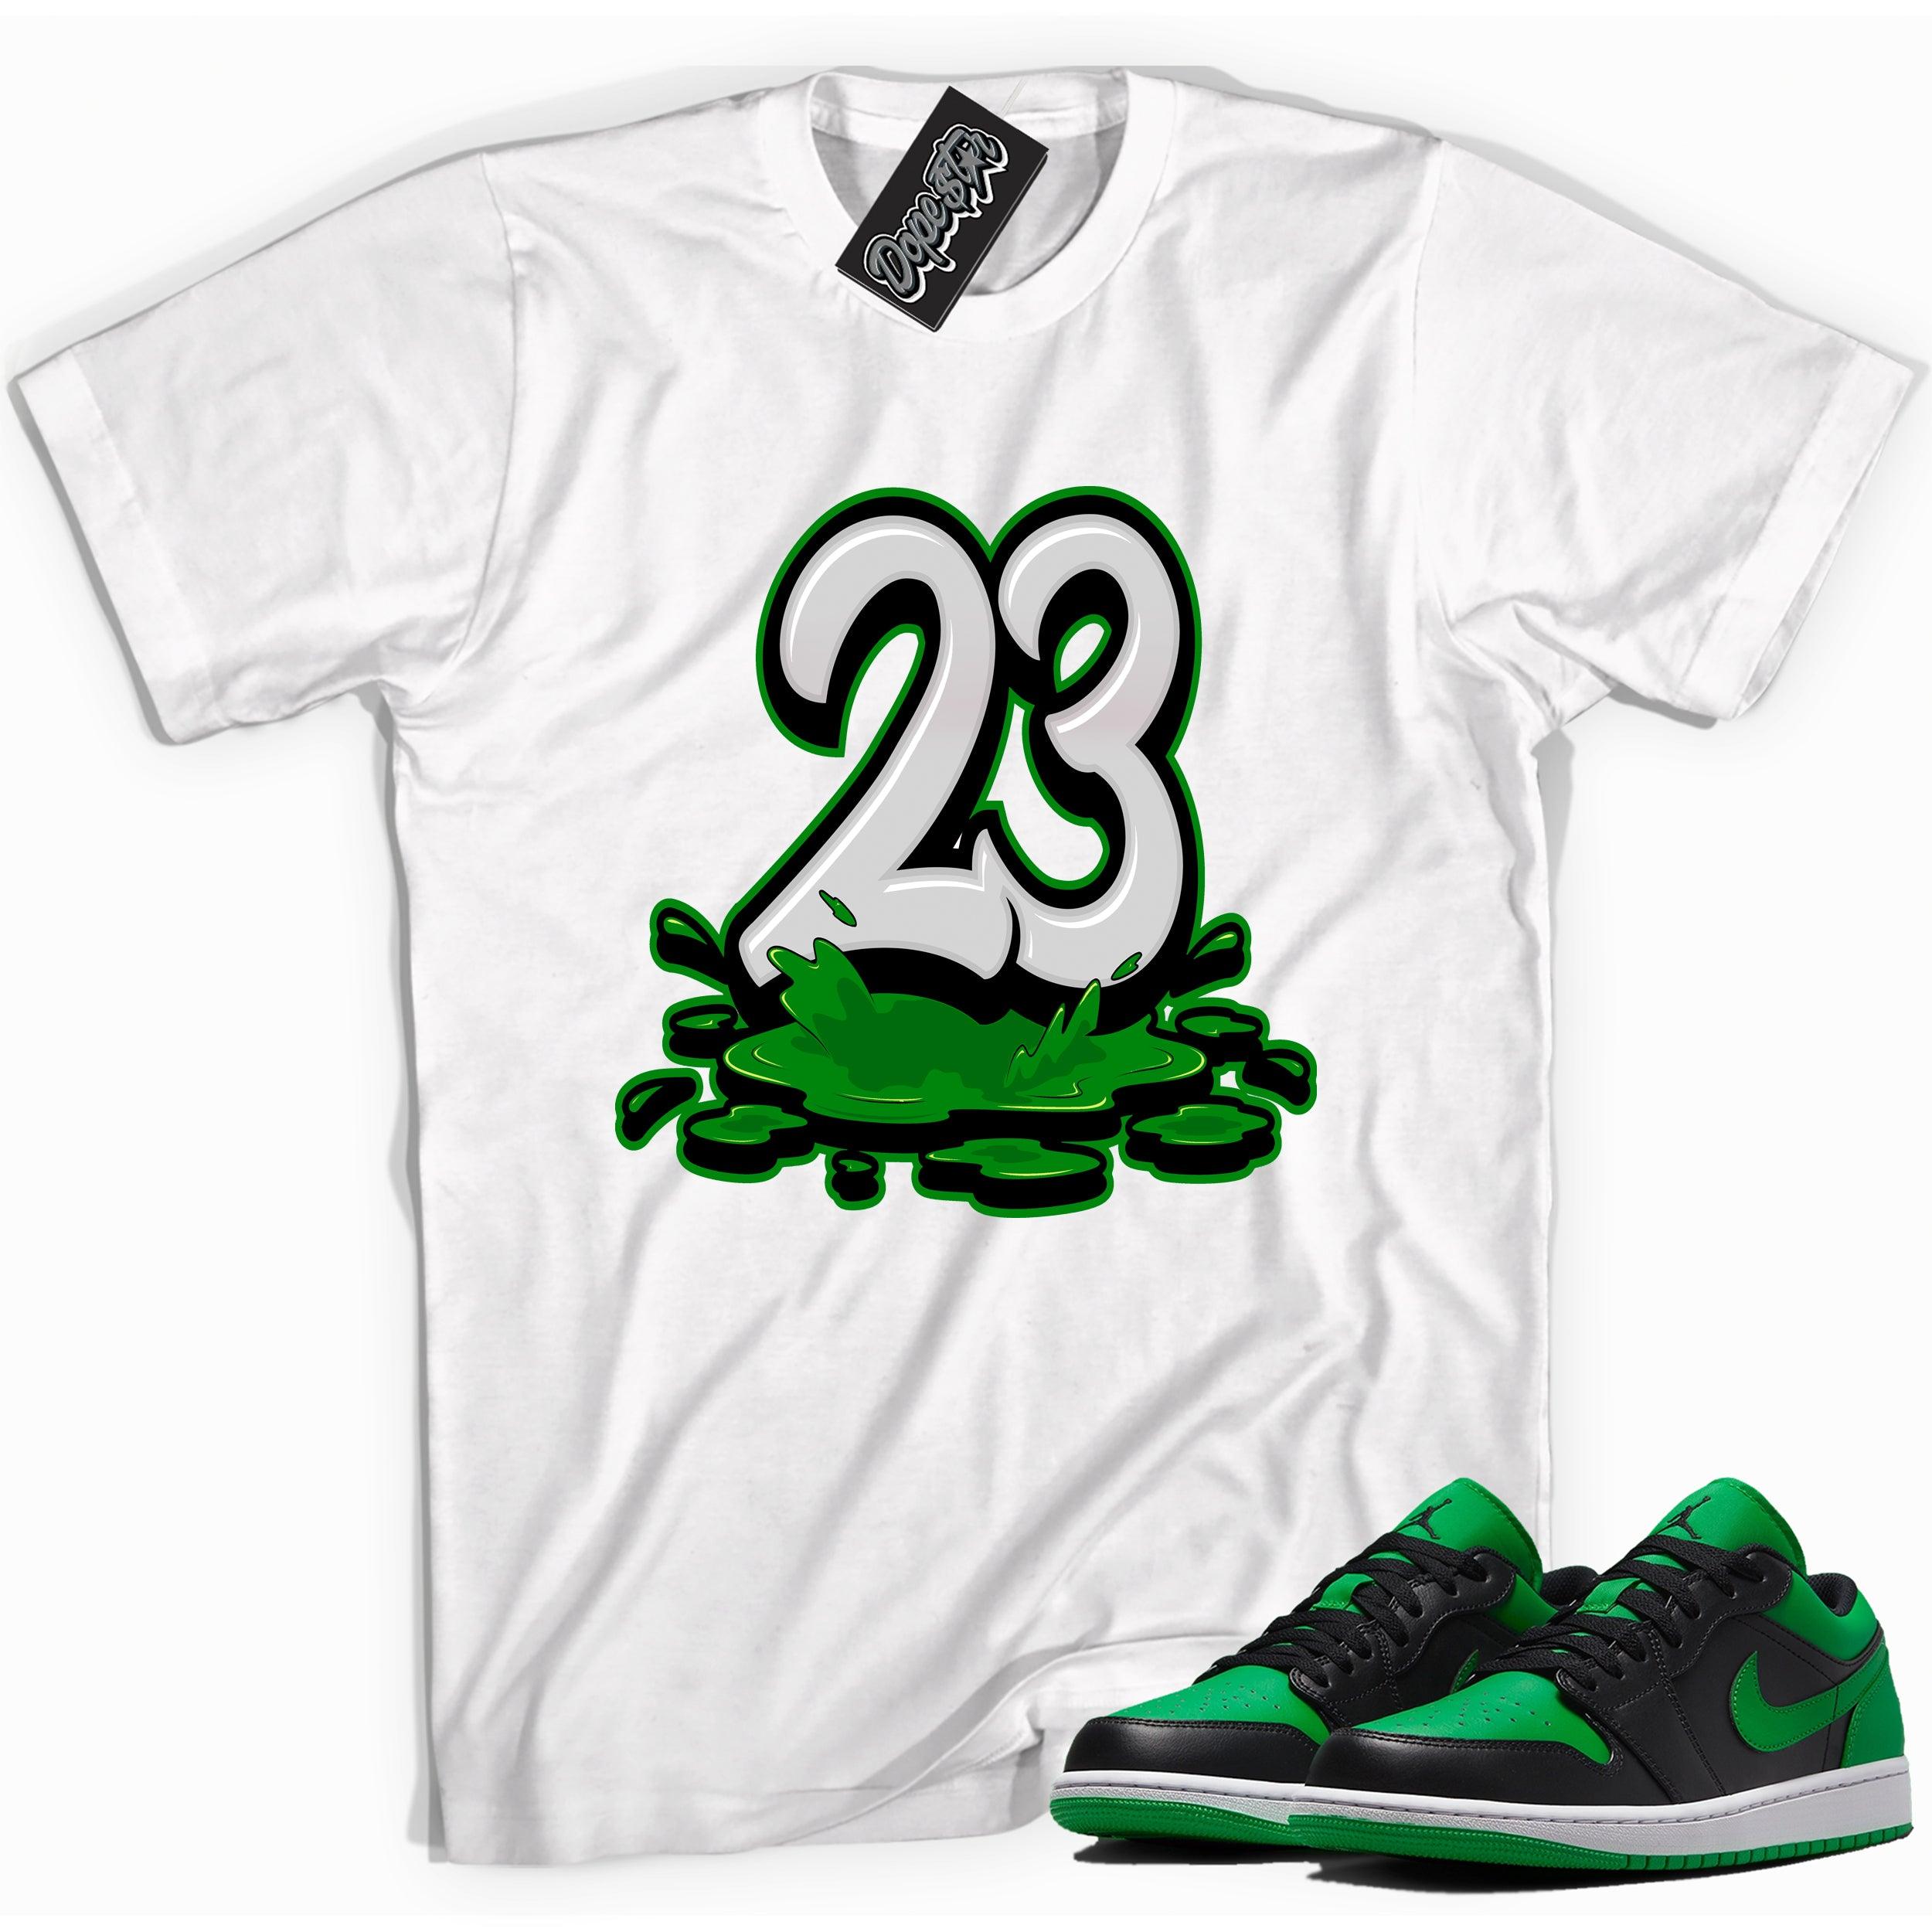 Cool white graphic tee with '23' print, that perfectly matches Air Jordan 1 Low Lucky Green sneakers